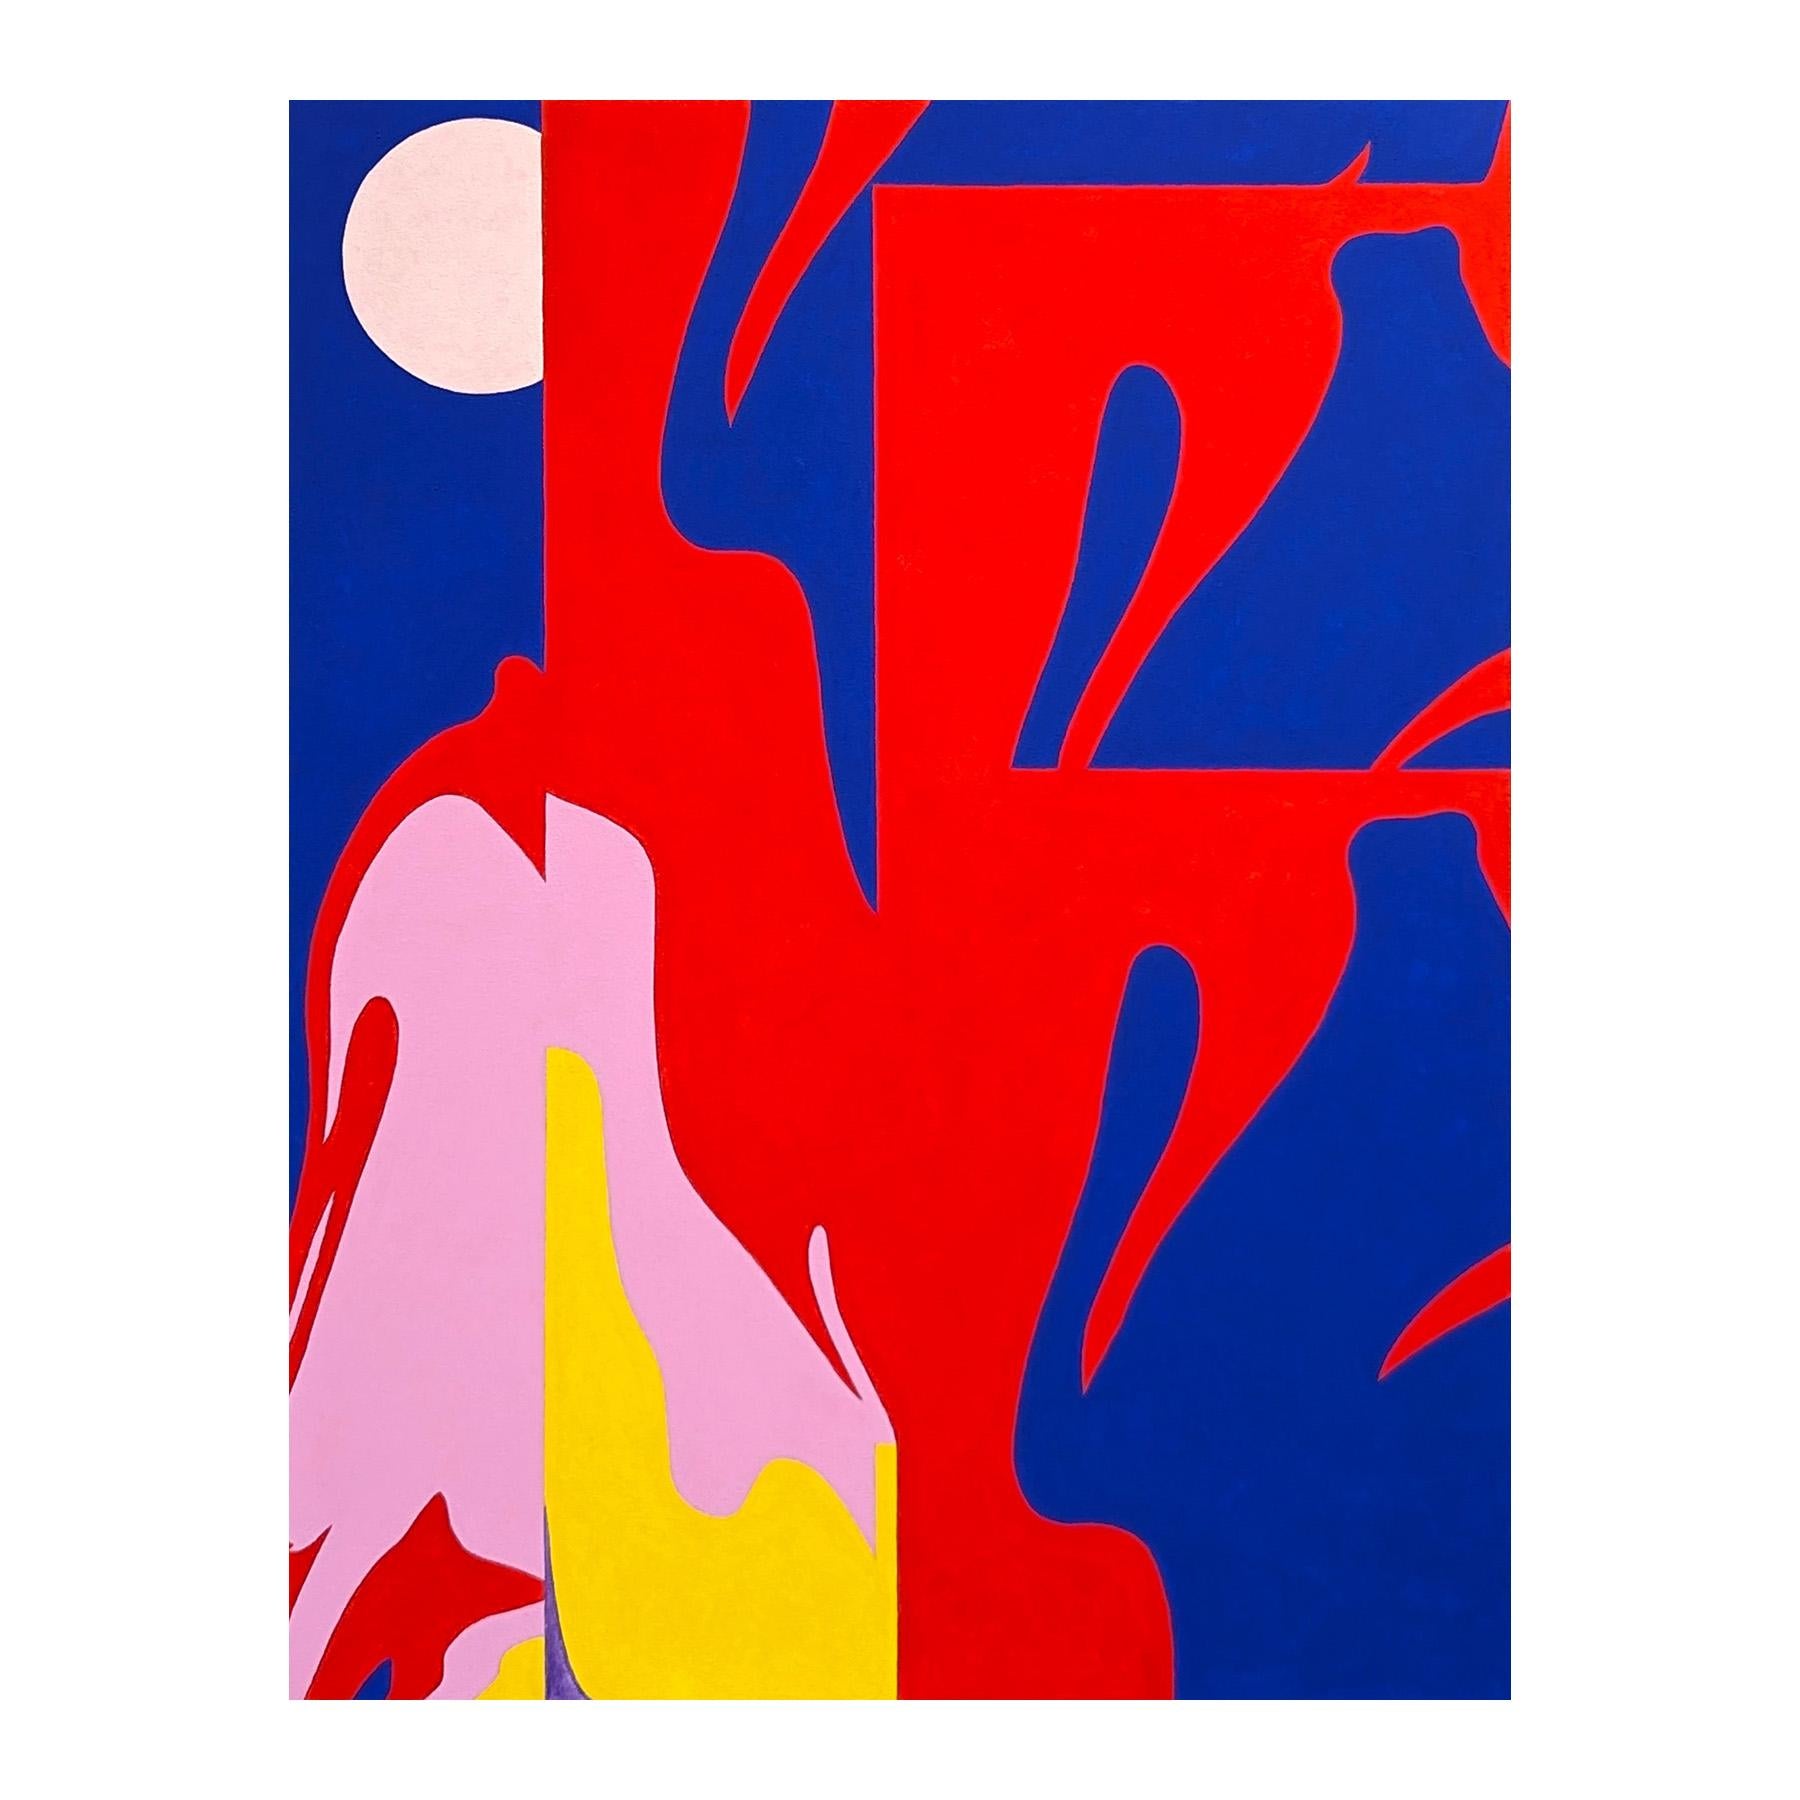 Contemporary abstract painting by local Houston artist Emmanuel Araujo. The work features swirling bursts of color in blue, red, pink, and yellow. Signed, titled, and dated on the reverse. Currently unframed, but options are available. 

Artist